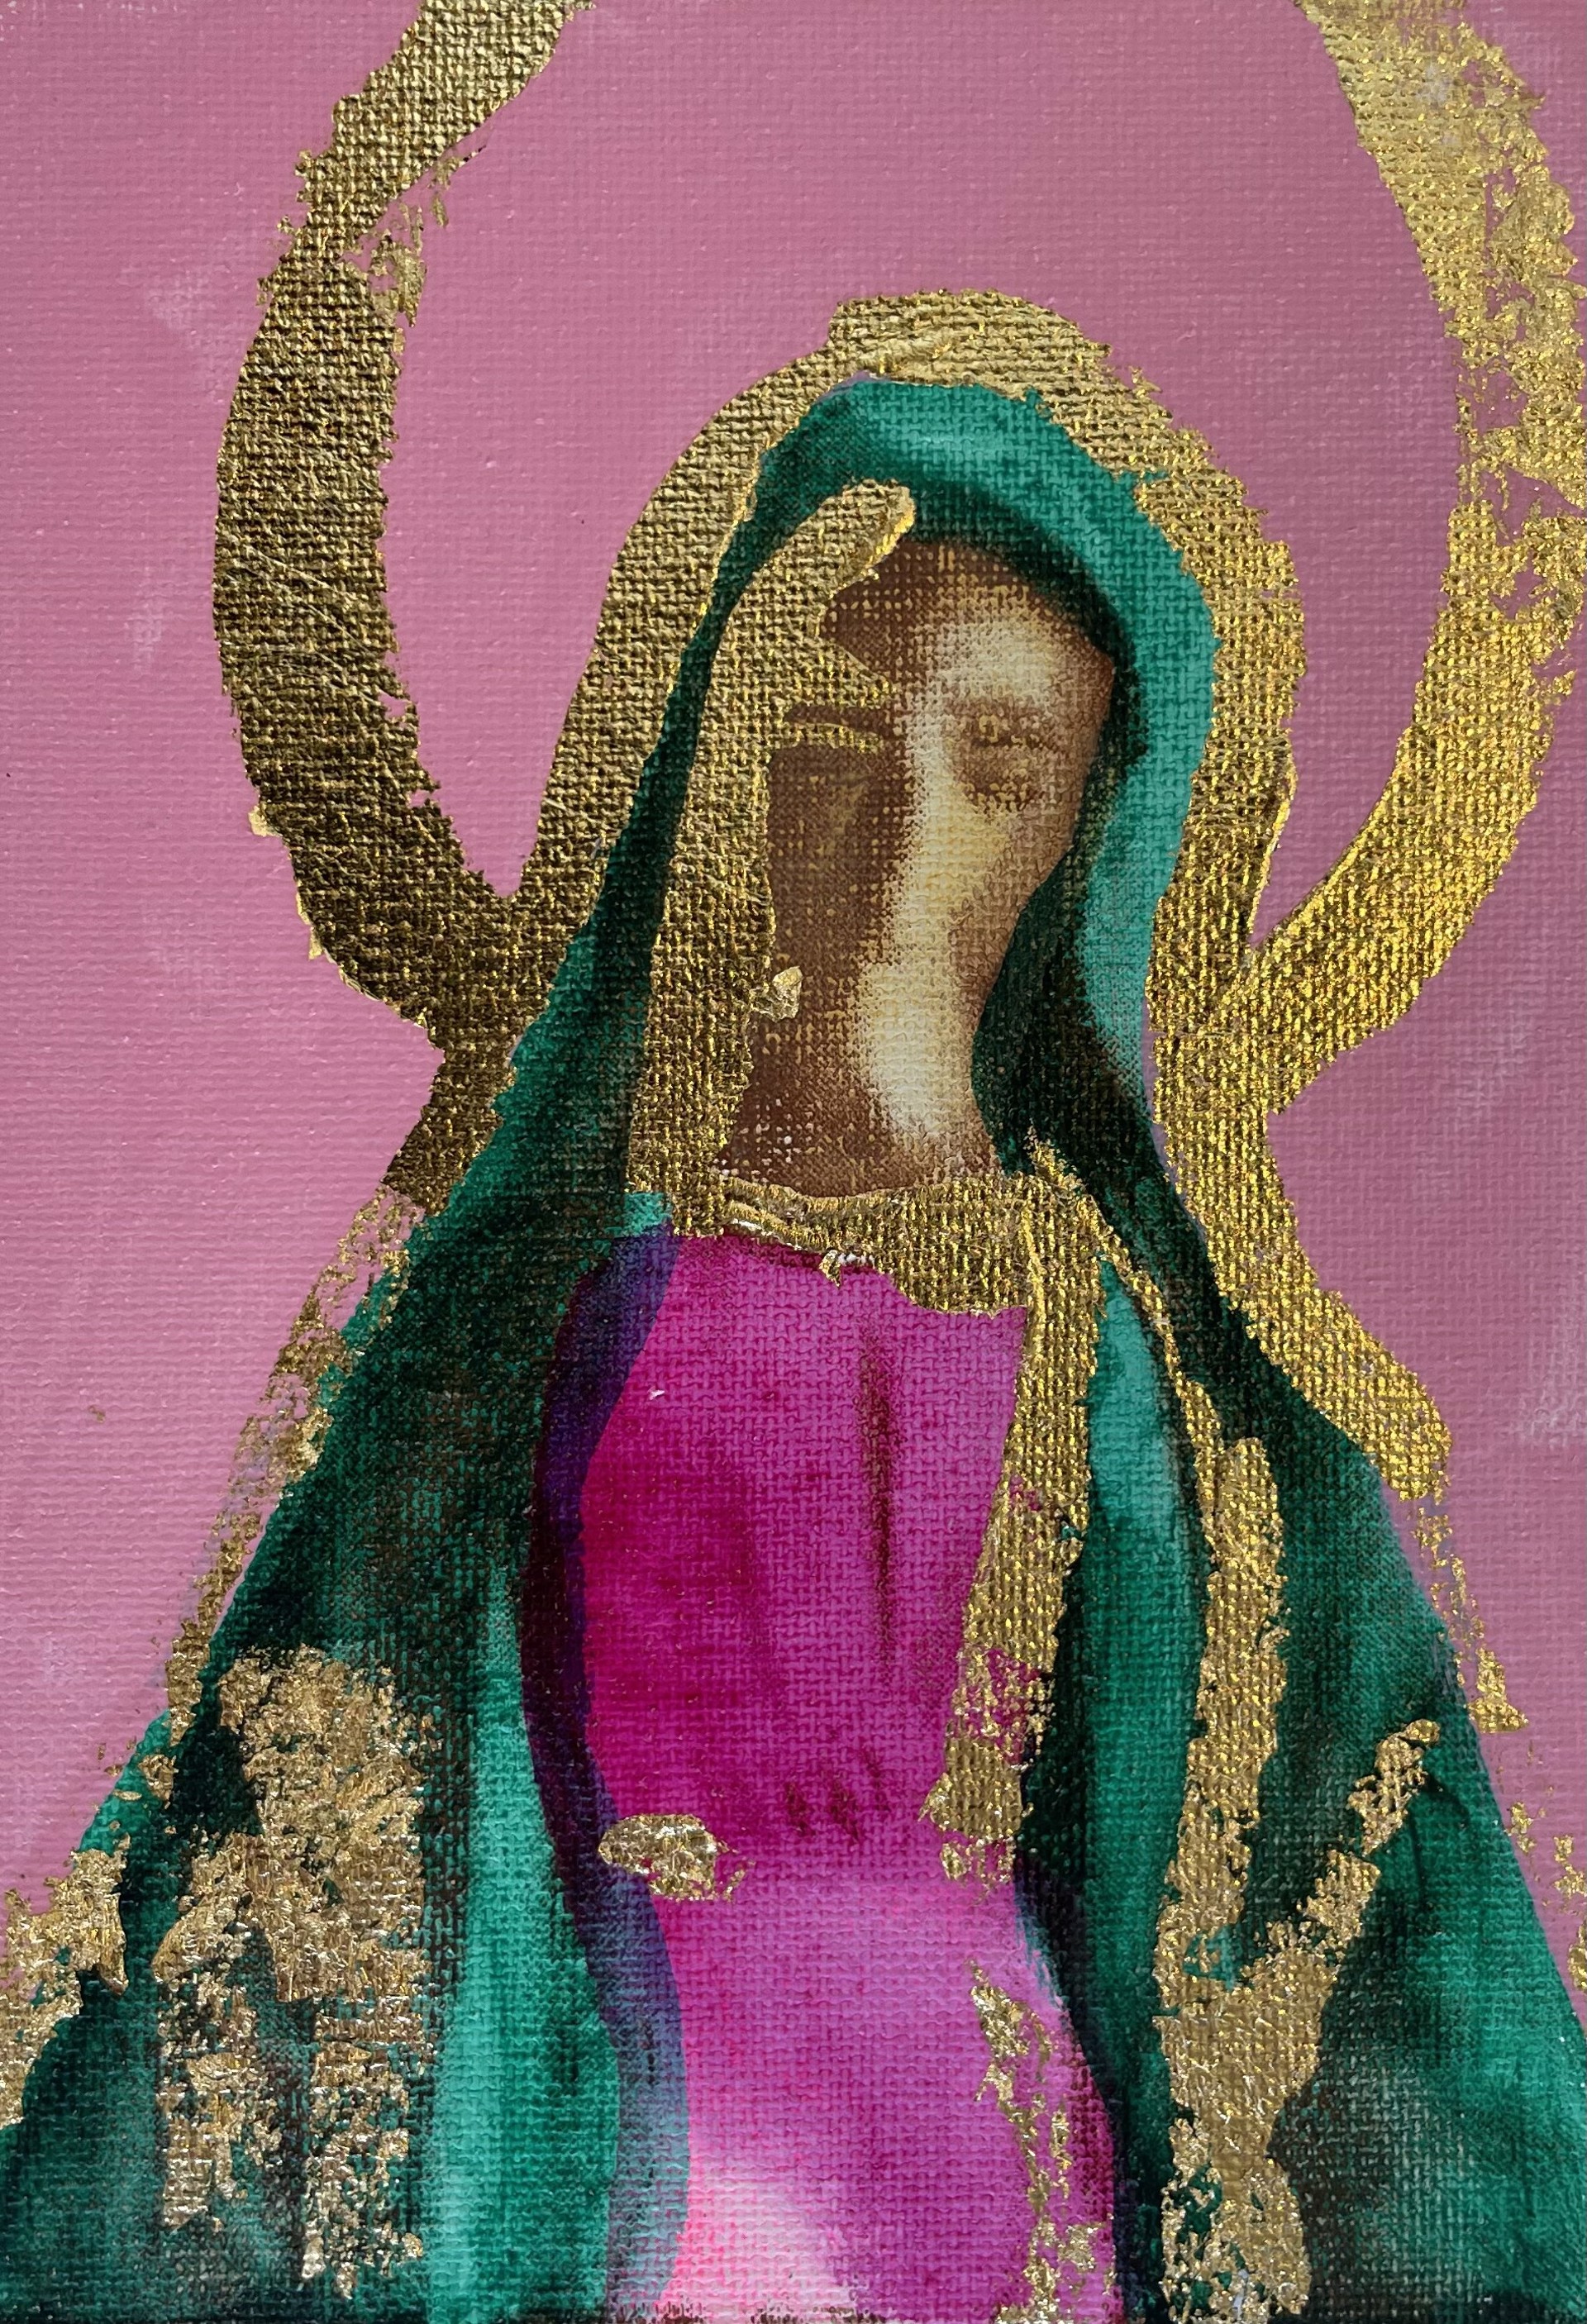 Hail Mary 4 by Megan Coonelly